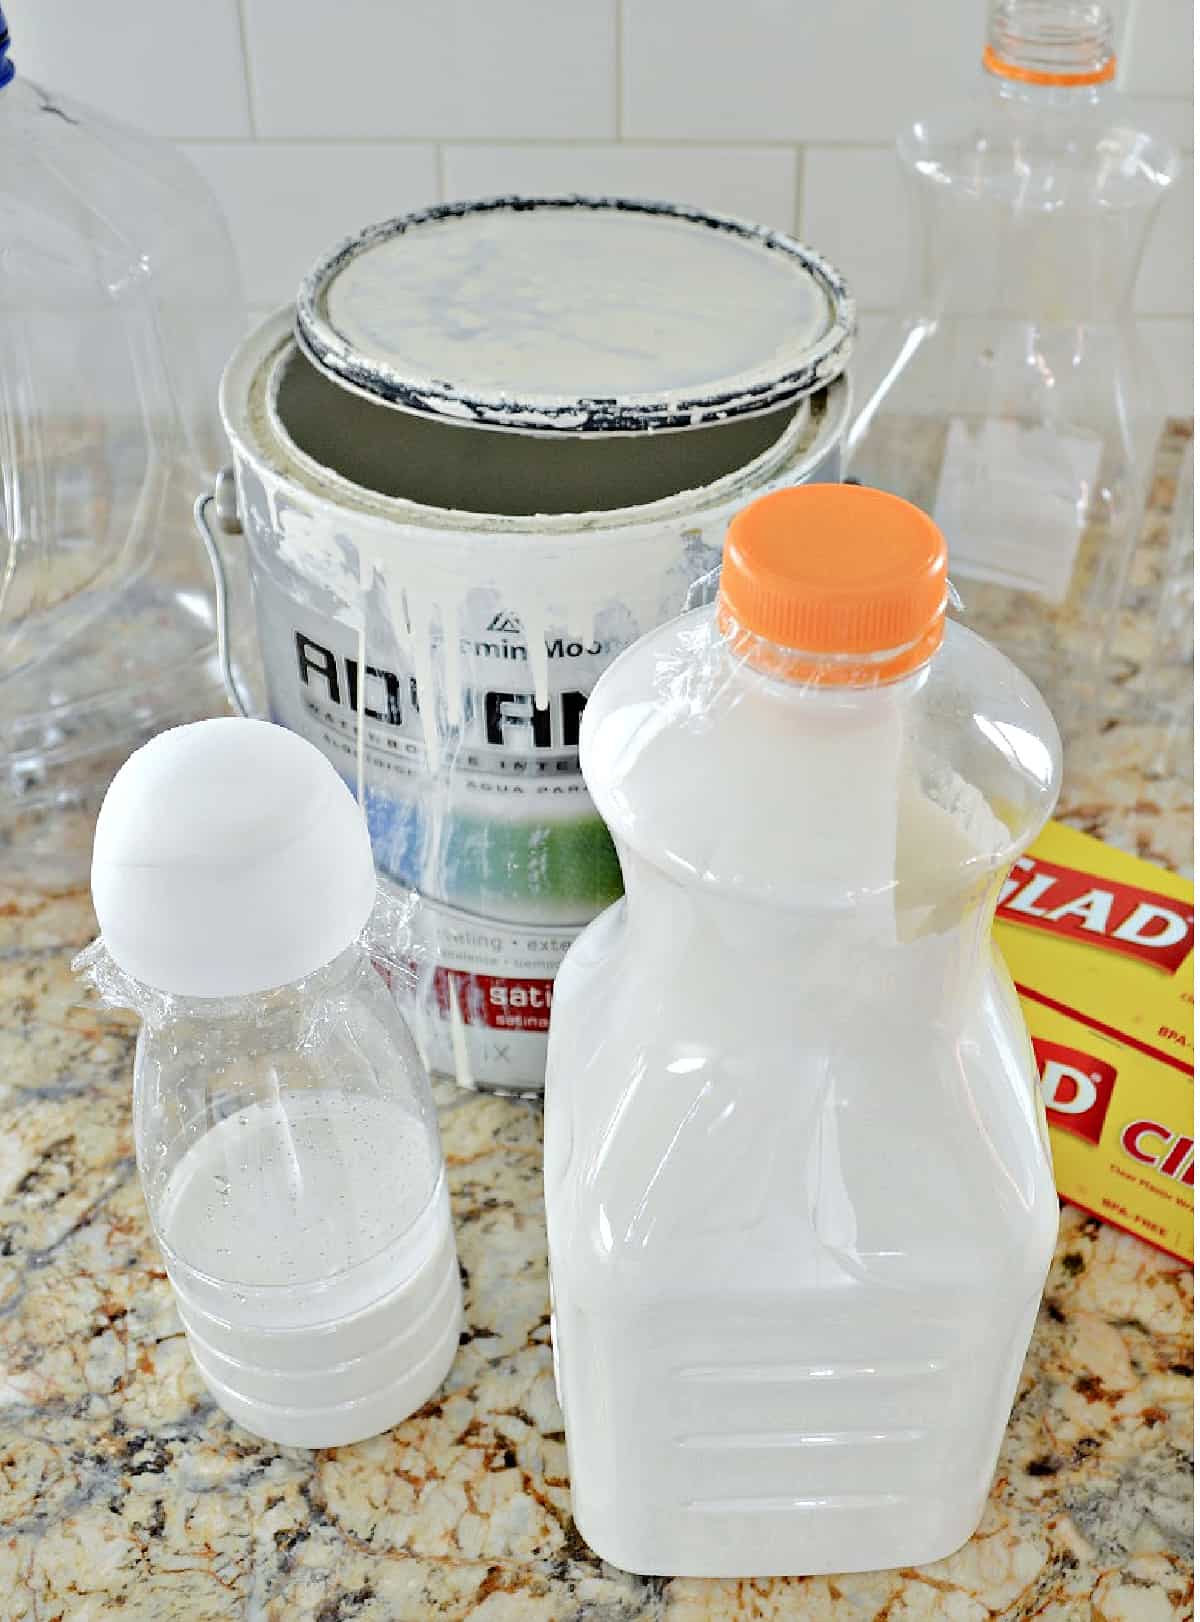 creamer container and plastic container filled with paint